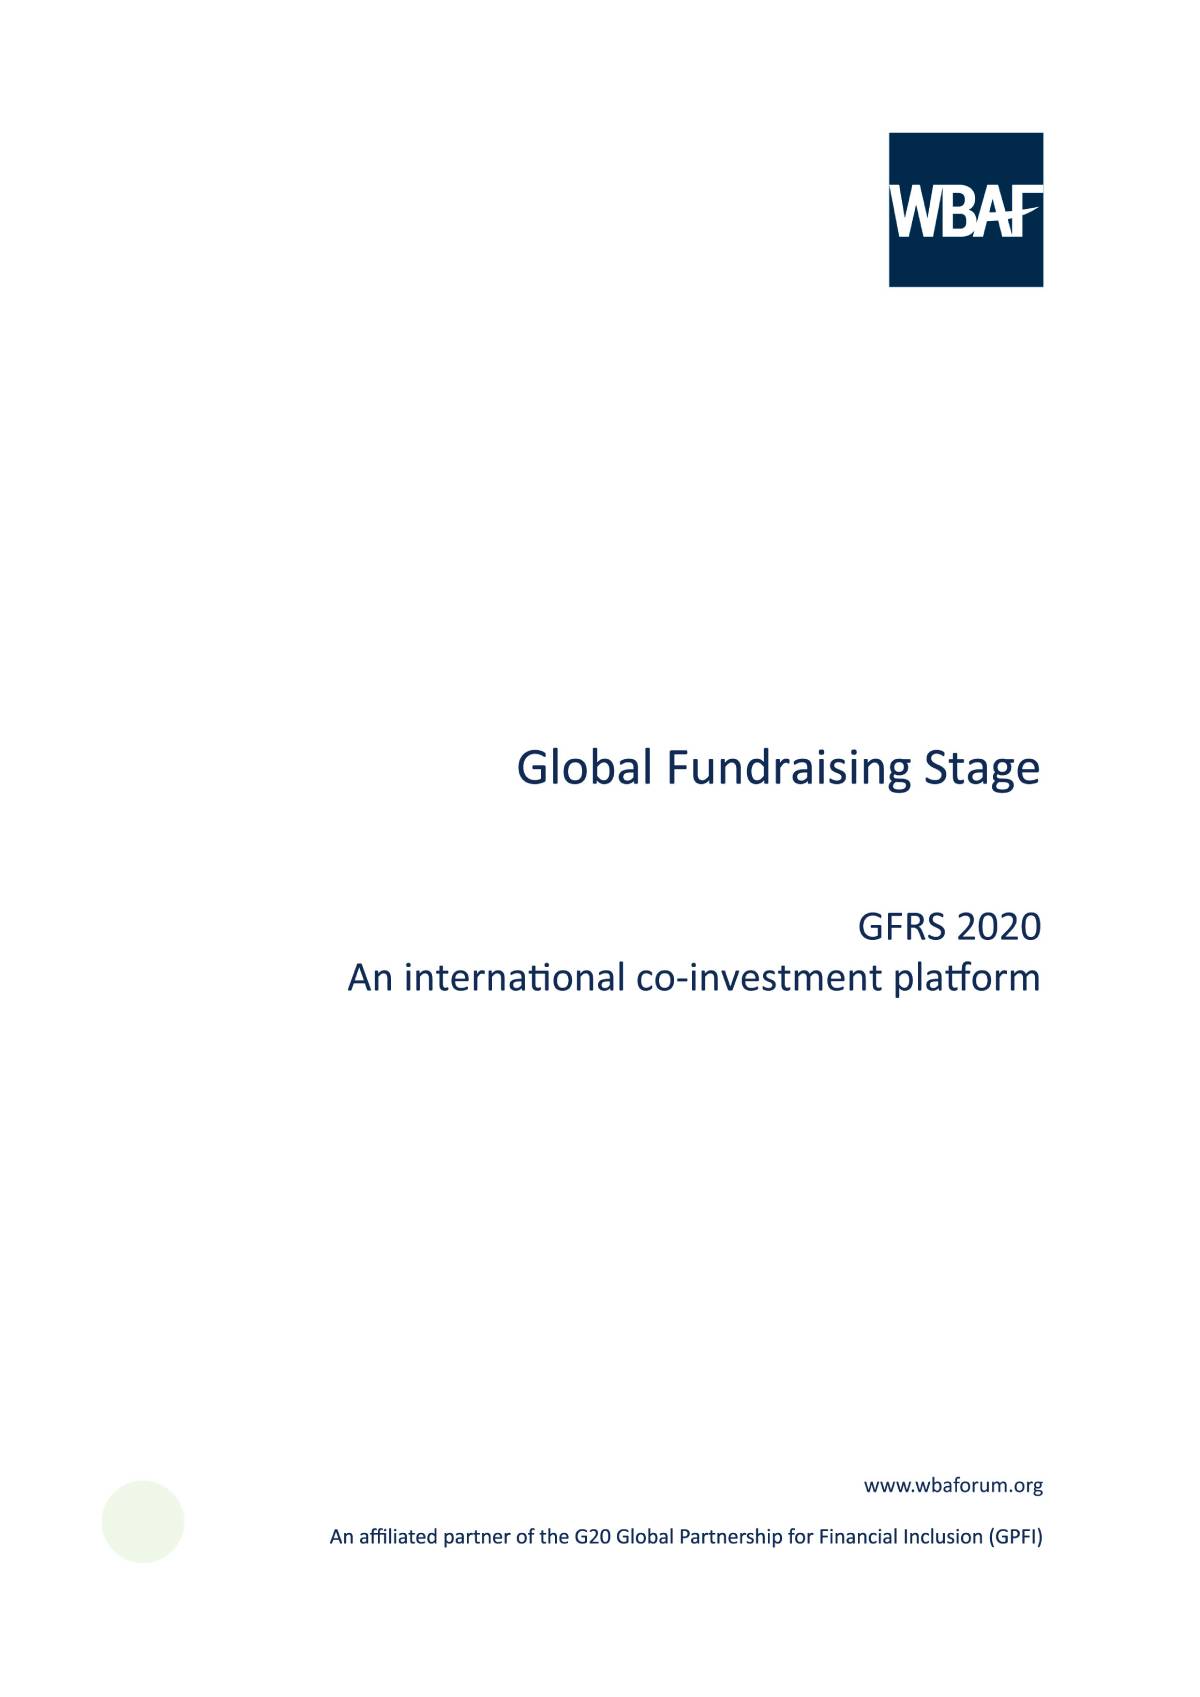 Global Fundraising Stage - GFRS 2020